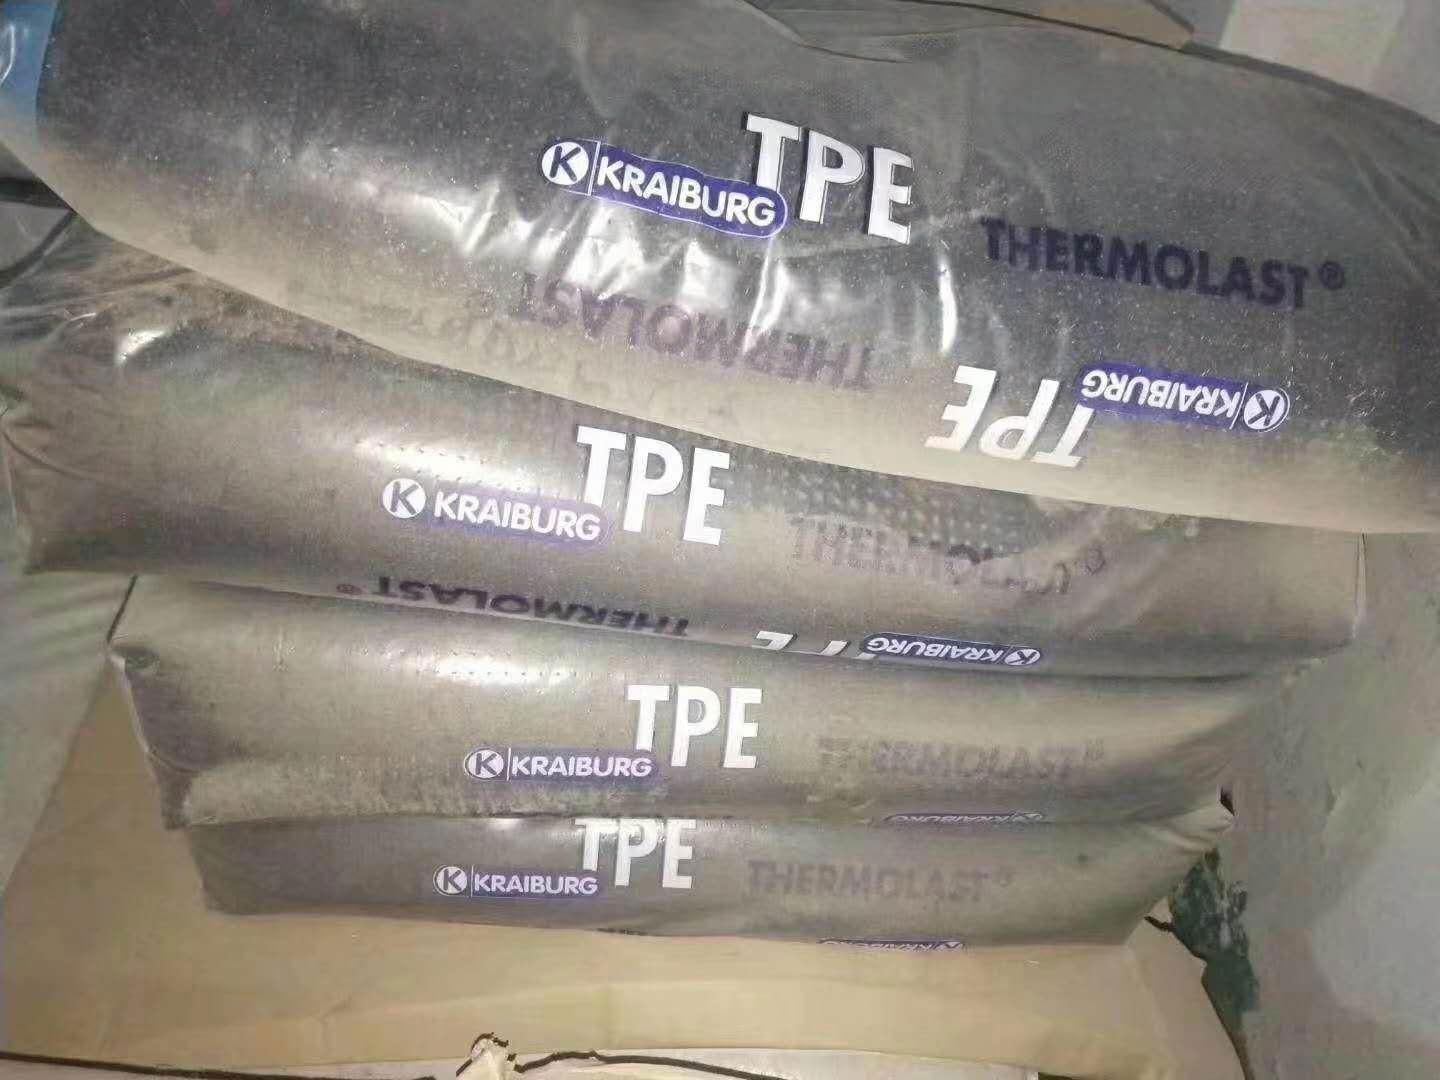 TPE THERMOLAST